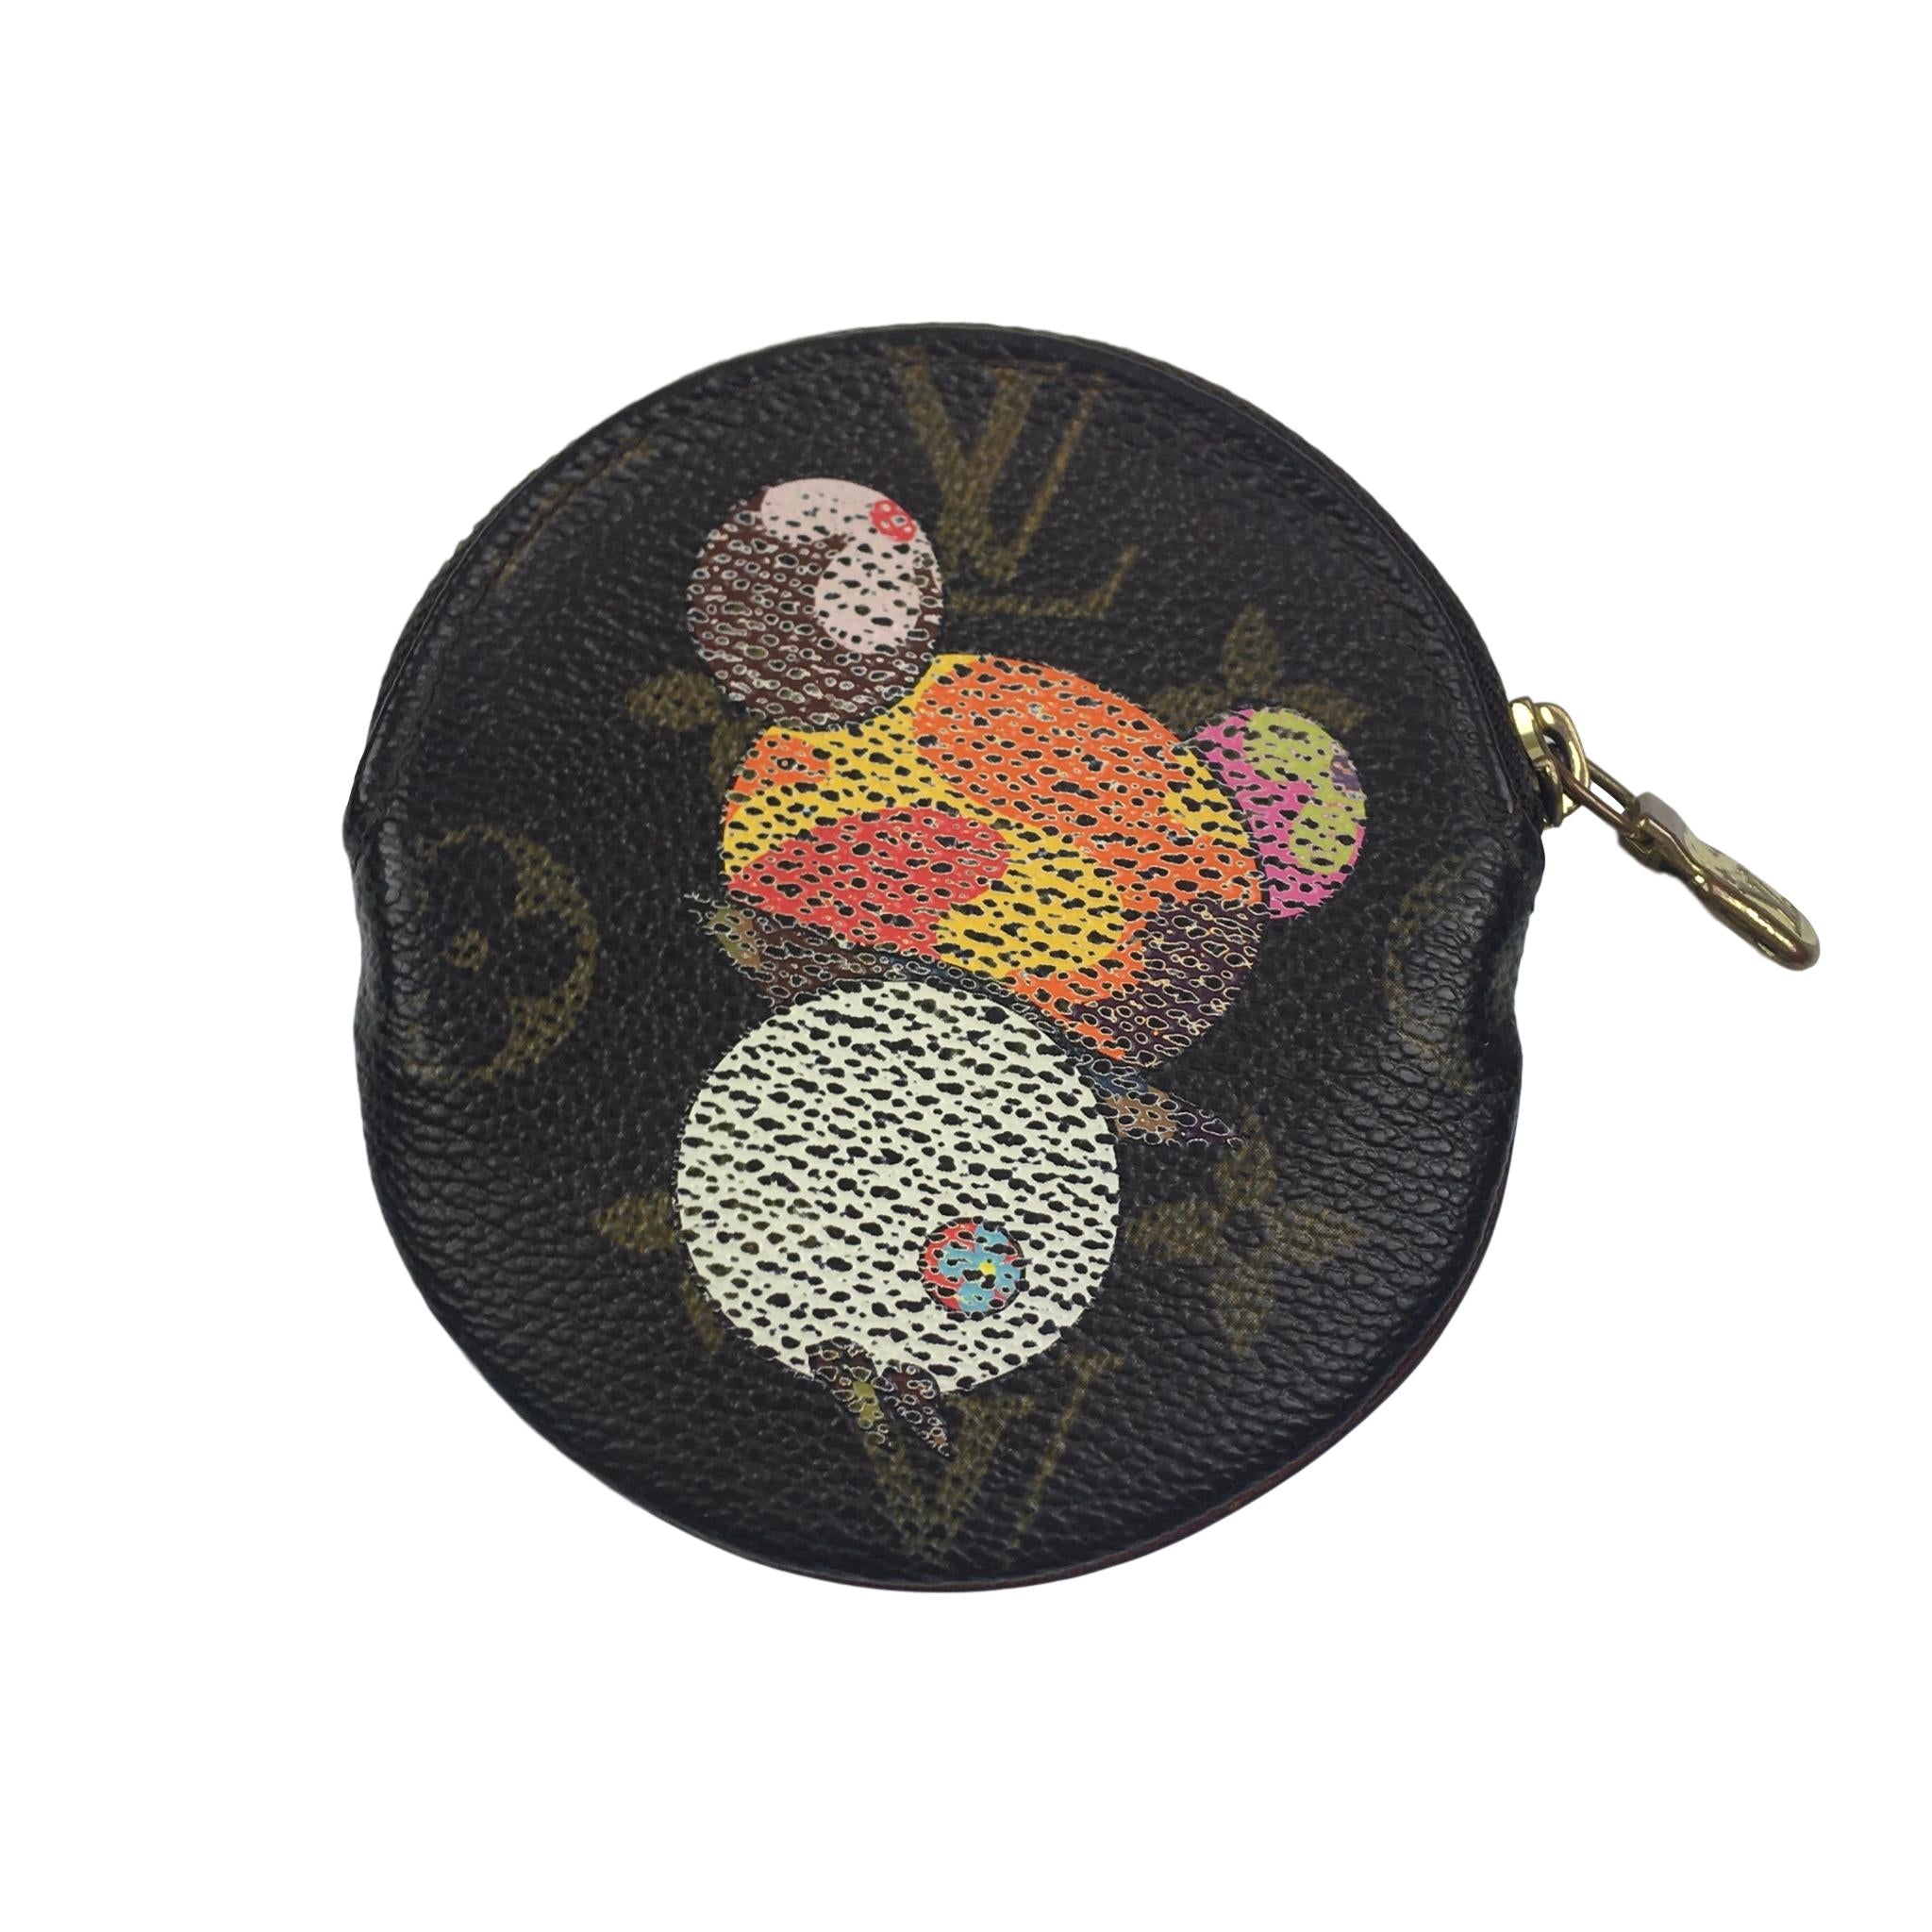 Buy Free Shipping [Used] LOUIS VUITTON Monogram Panda Porto Monet Zip Round  Zipper Long Wallet Takashi Murakami Collaboration M61729 from Japan - Buy  authentic Plus exclusive items from Japan